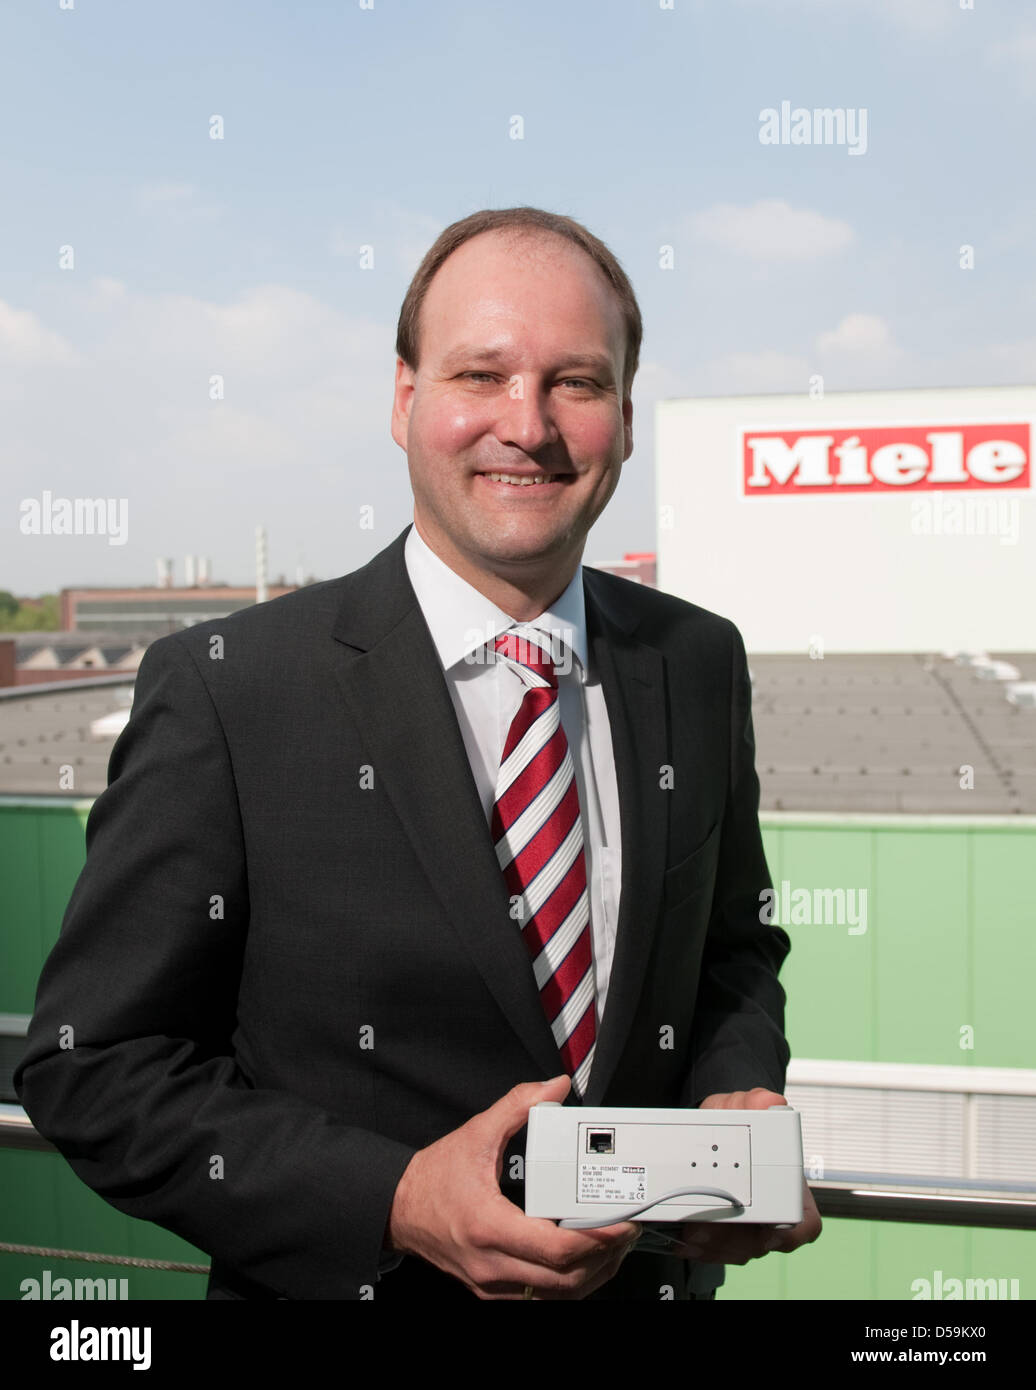 Markus Miele, member of the executive board of the household appliance company Miele, presents electronic accessory devices in Guetersloh, Germany, 25 June 2010. The devices can be used to connect household appliances to the internet via the so-called 'Smart Grid' technology so that the appliances can be controlled from a smartphone. At a press conference, the family business annou Stock Photo